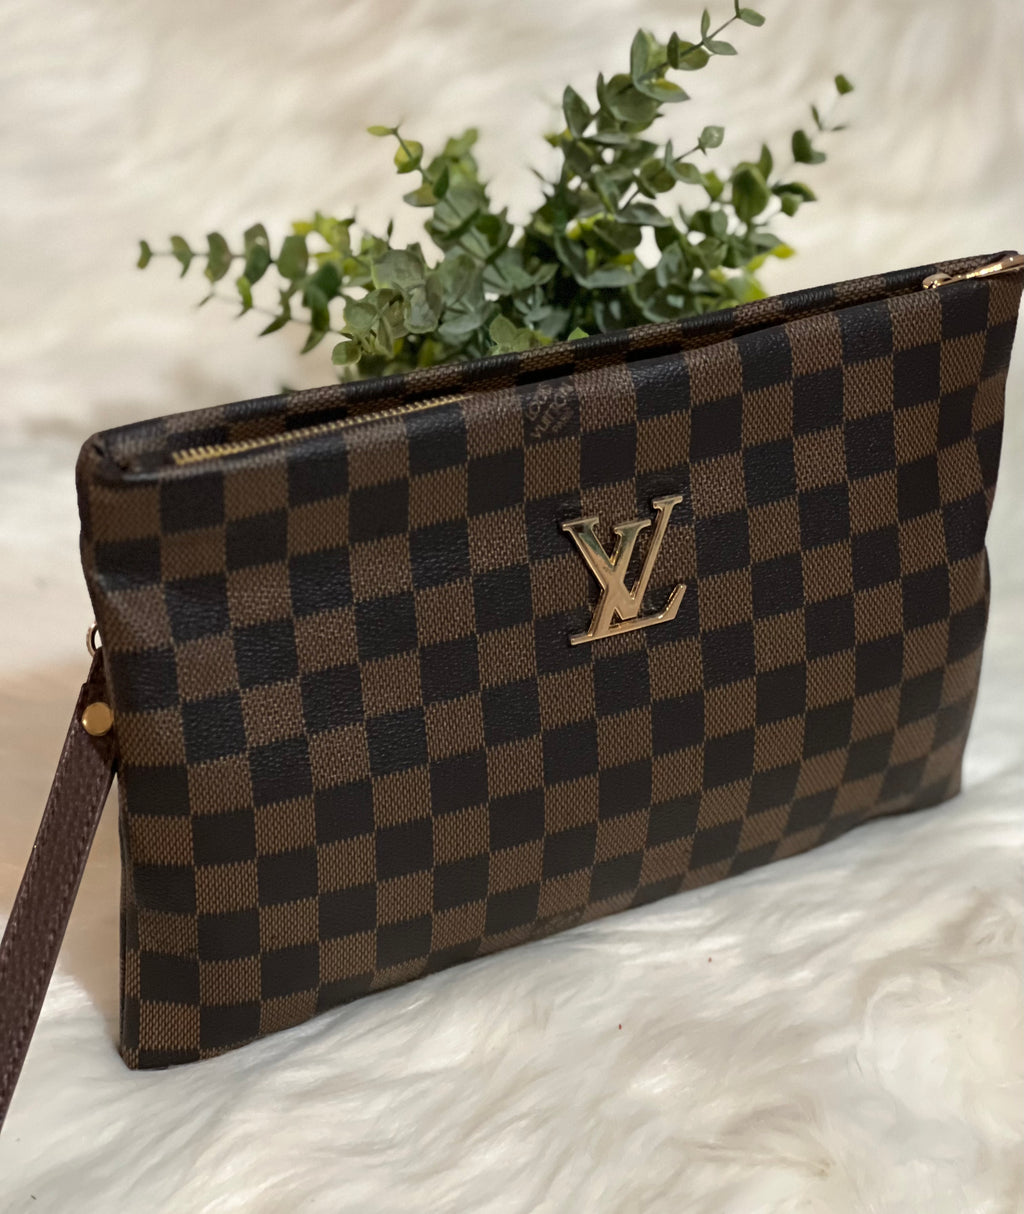 LV wristlet with handle